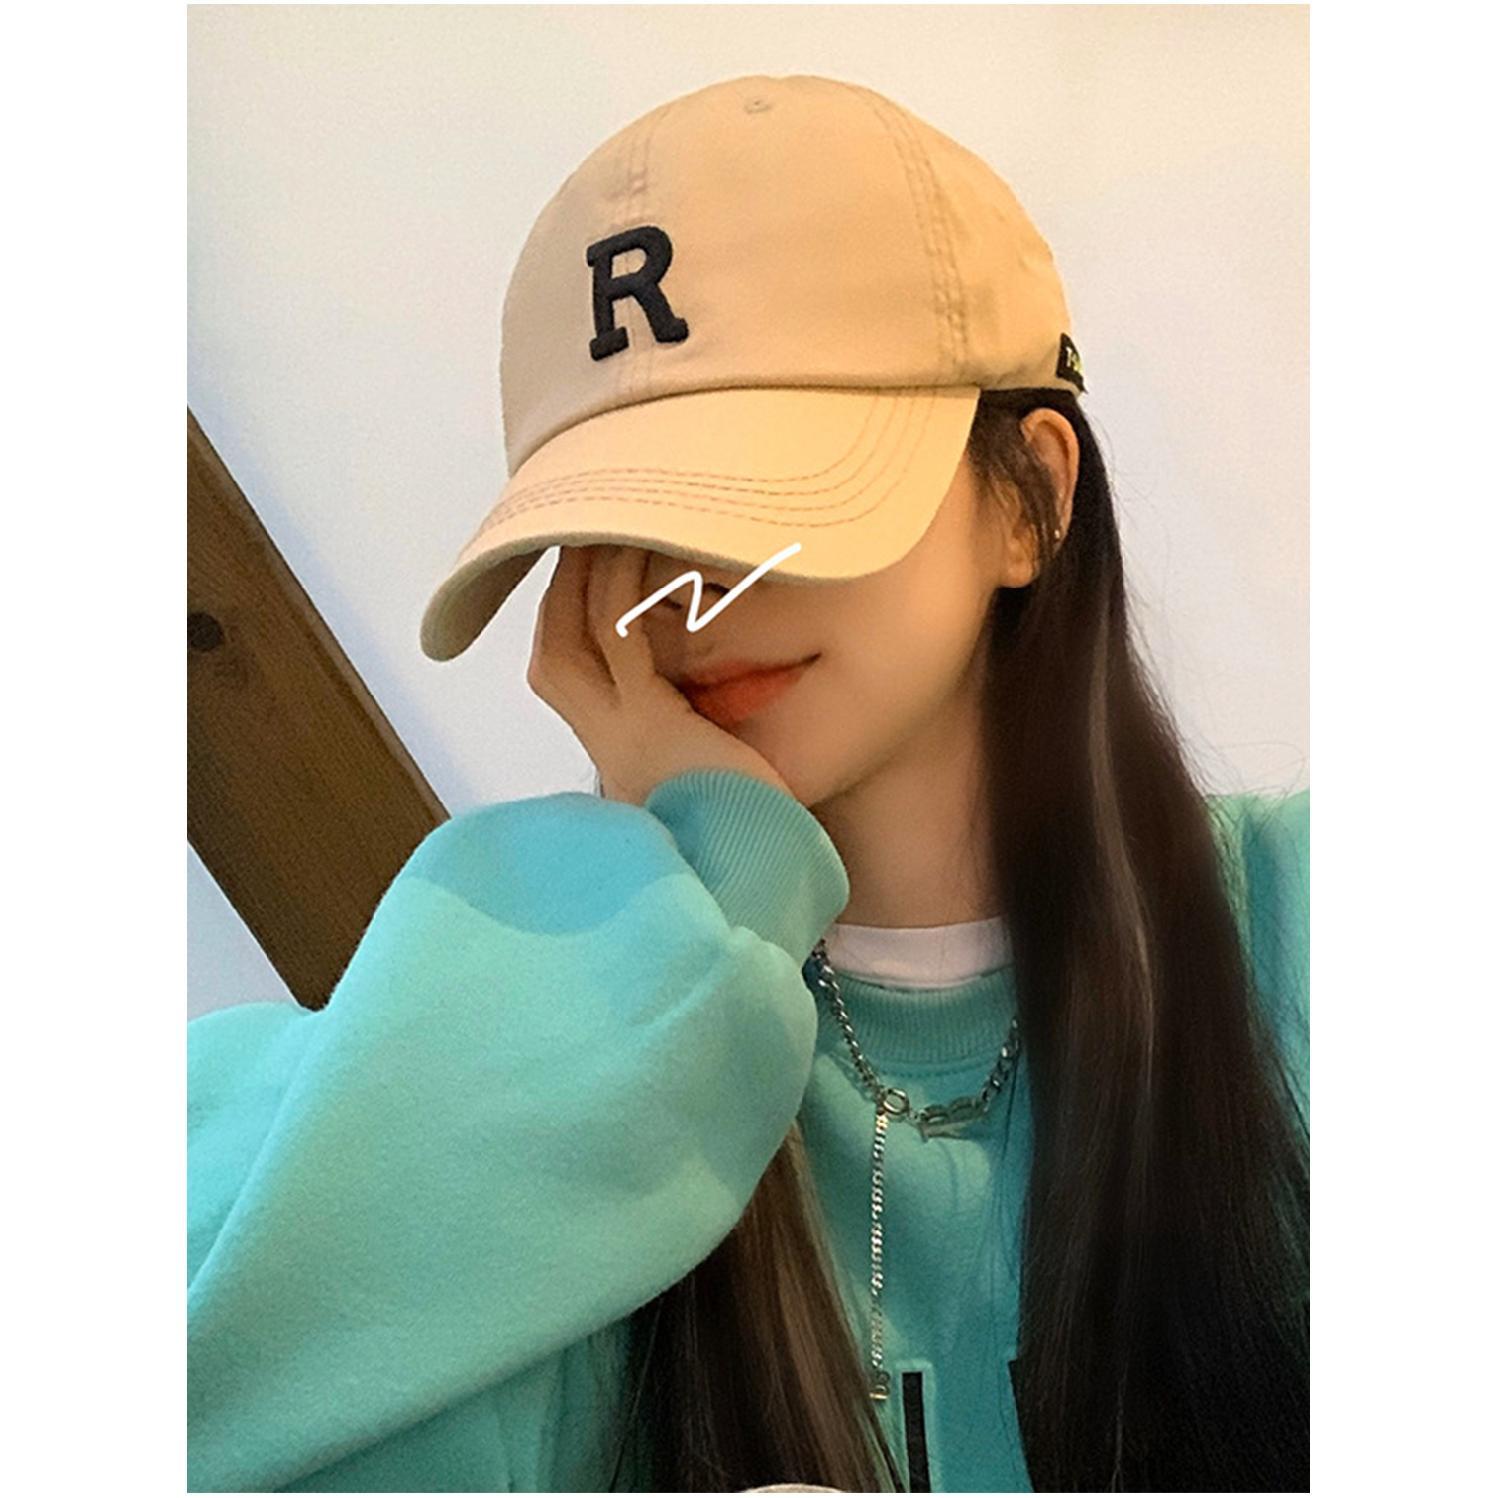 New letter R baseball hat female ins trendy all-match male spring and summer show face small deepening soft top sunscreen cap